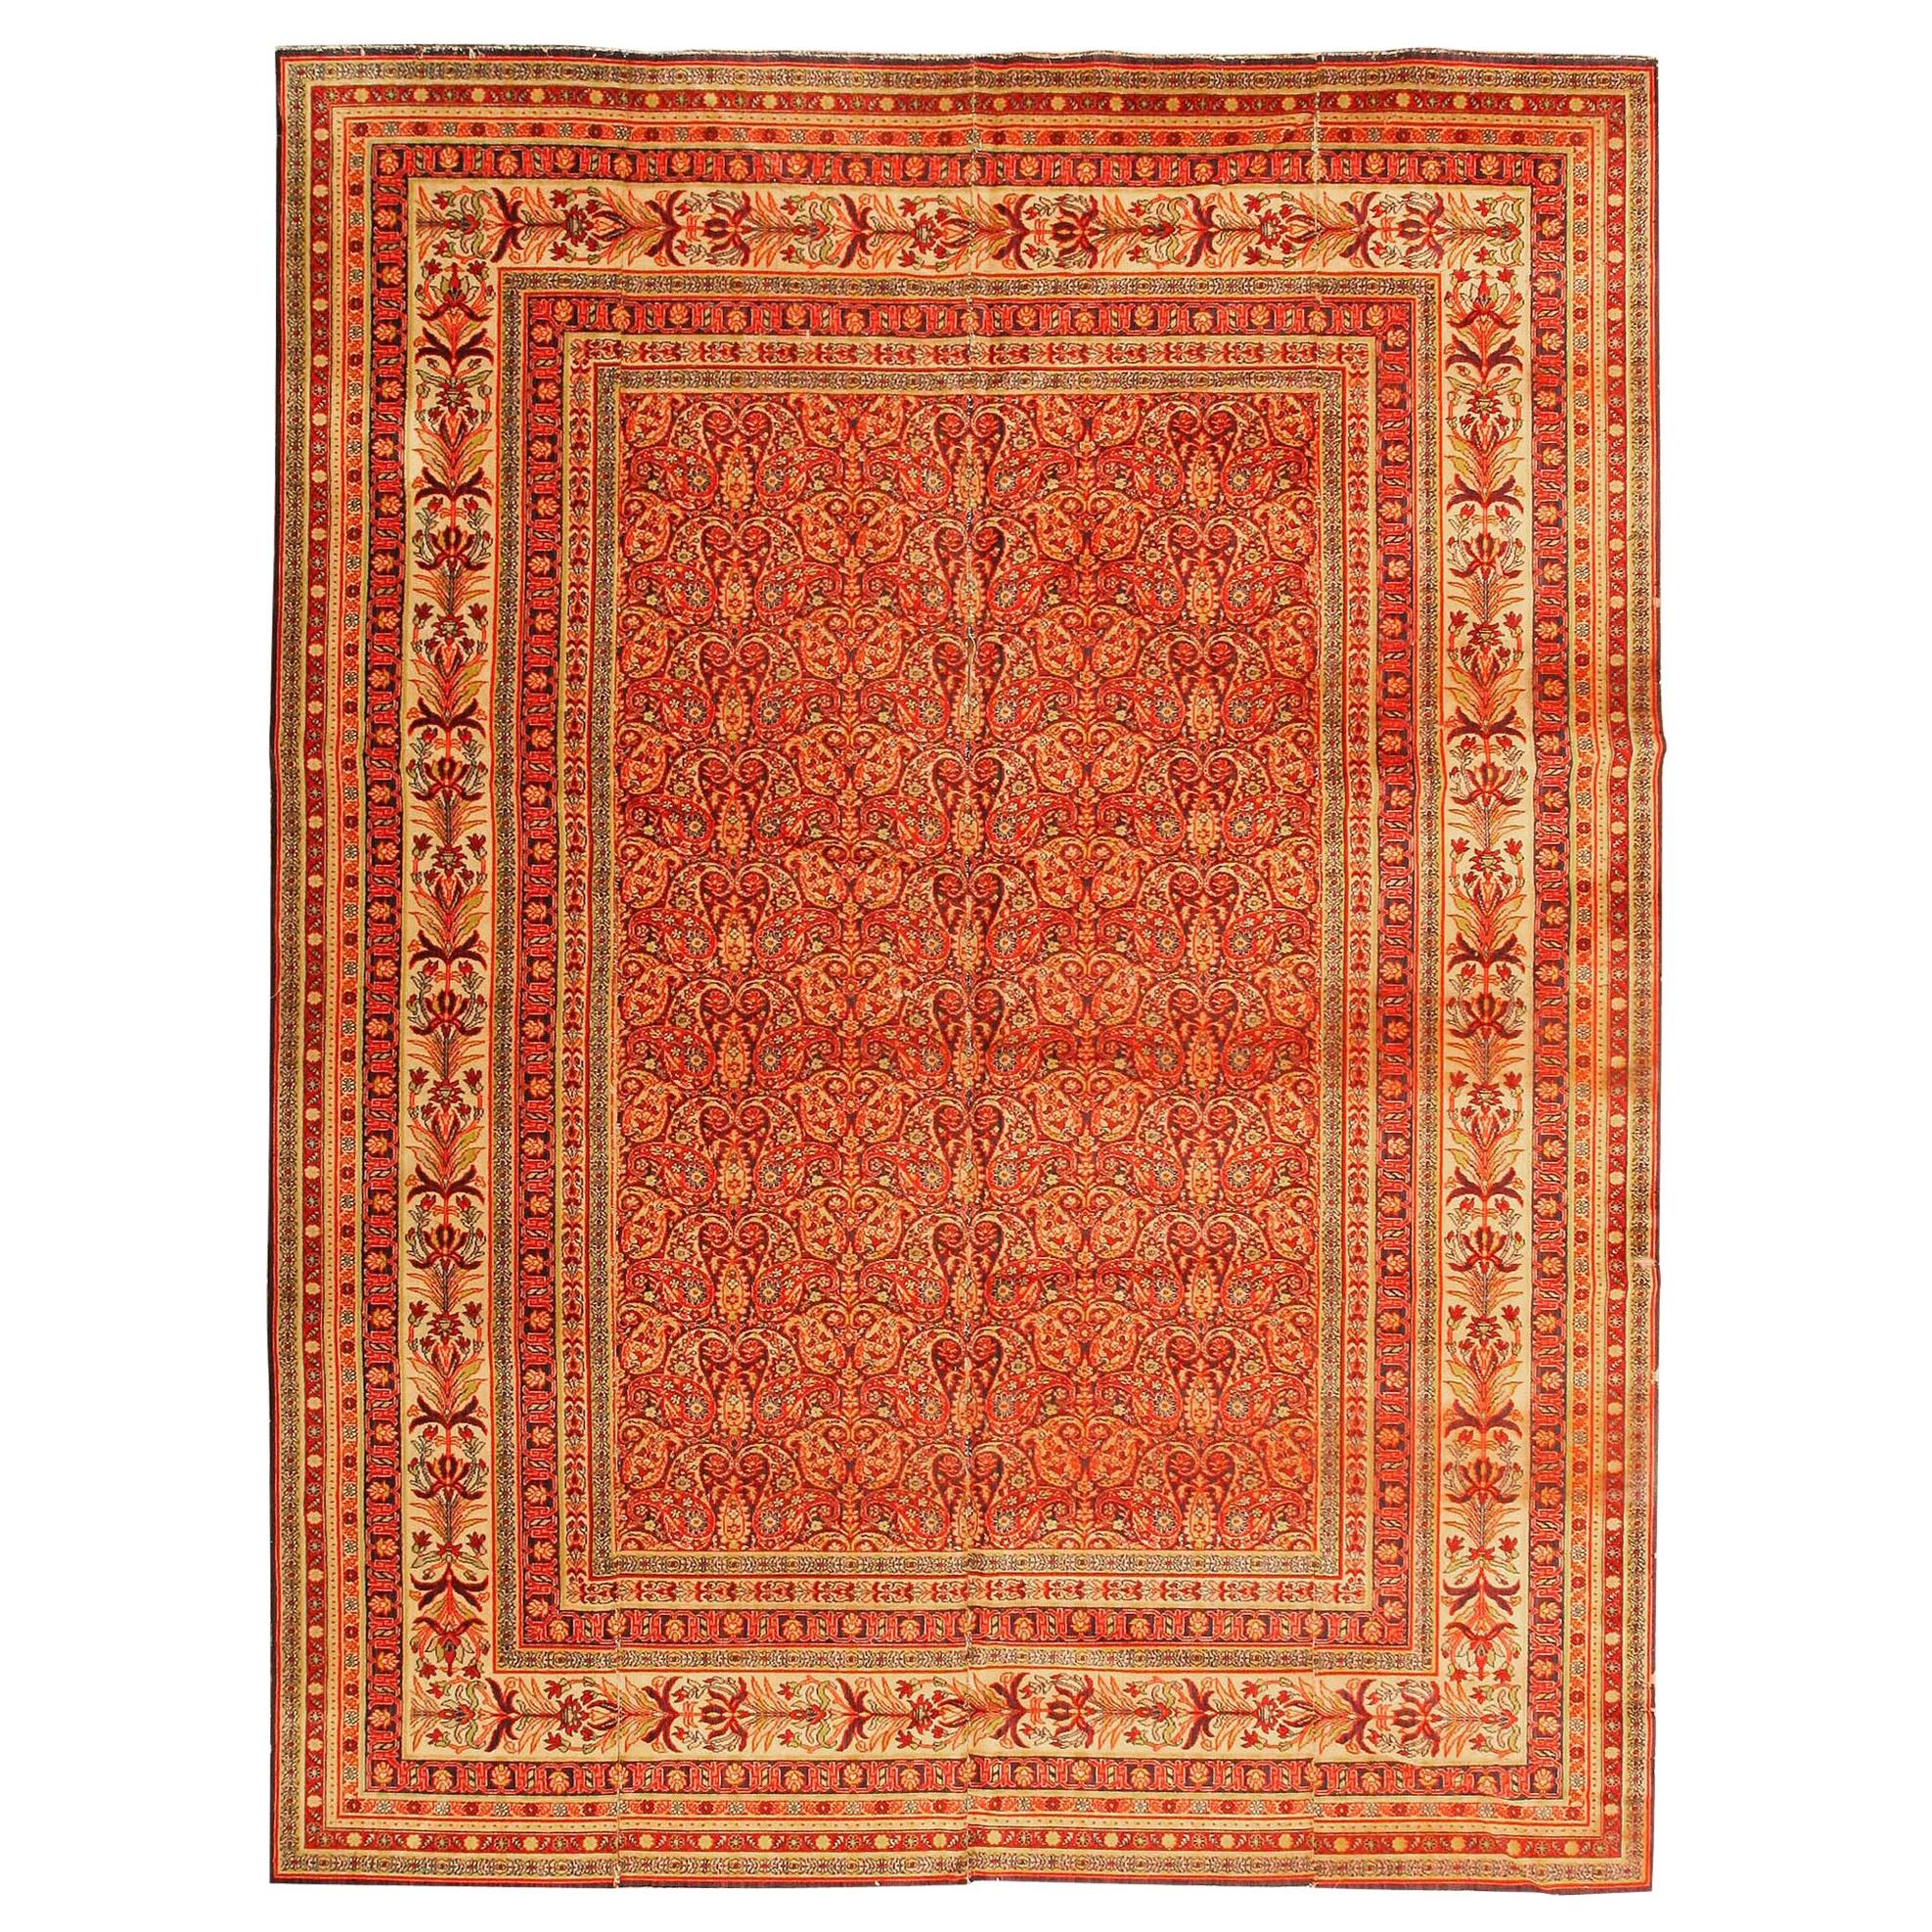 Antique Wilton English Carpet. Size: 8 ft 8 in x 11 ft 7 in (2.64 m x 3.53 m)